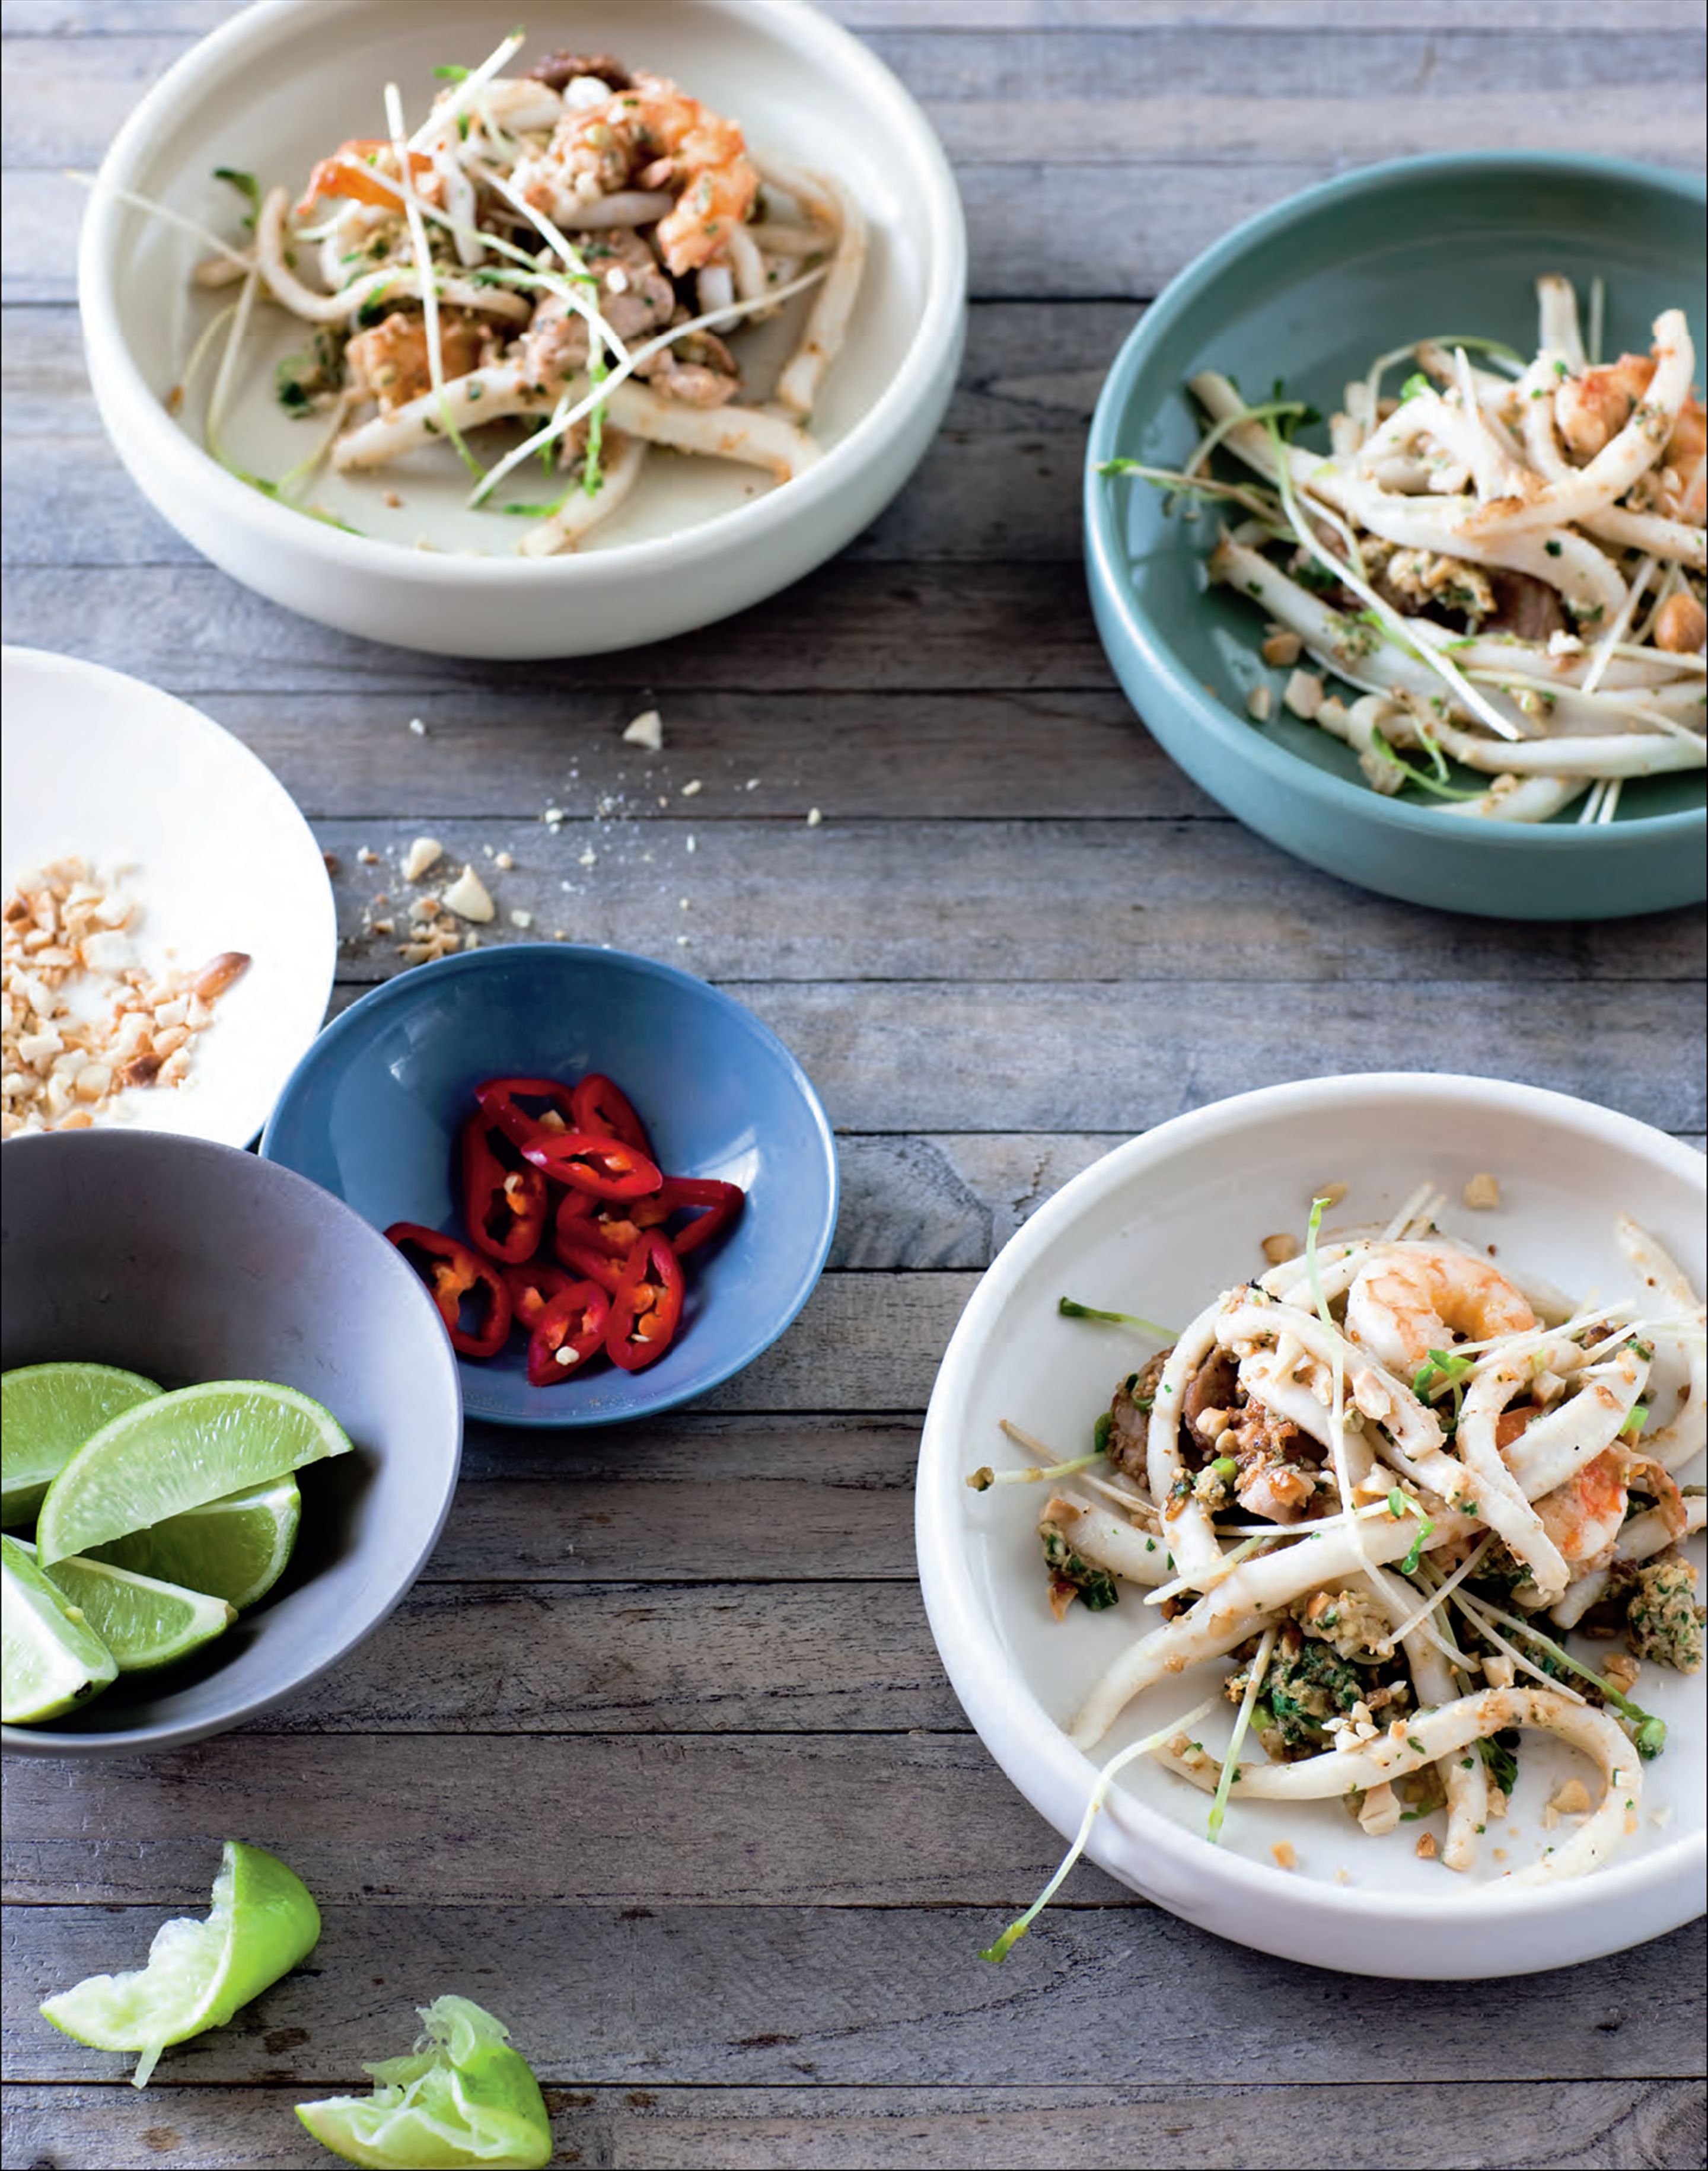 Pad Thai with squid ‘noodles’